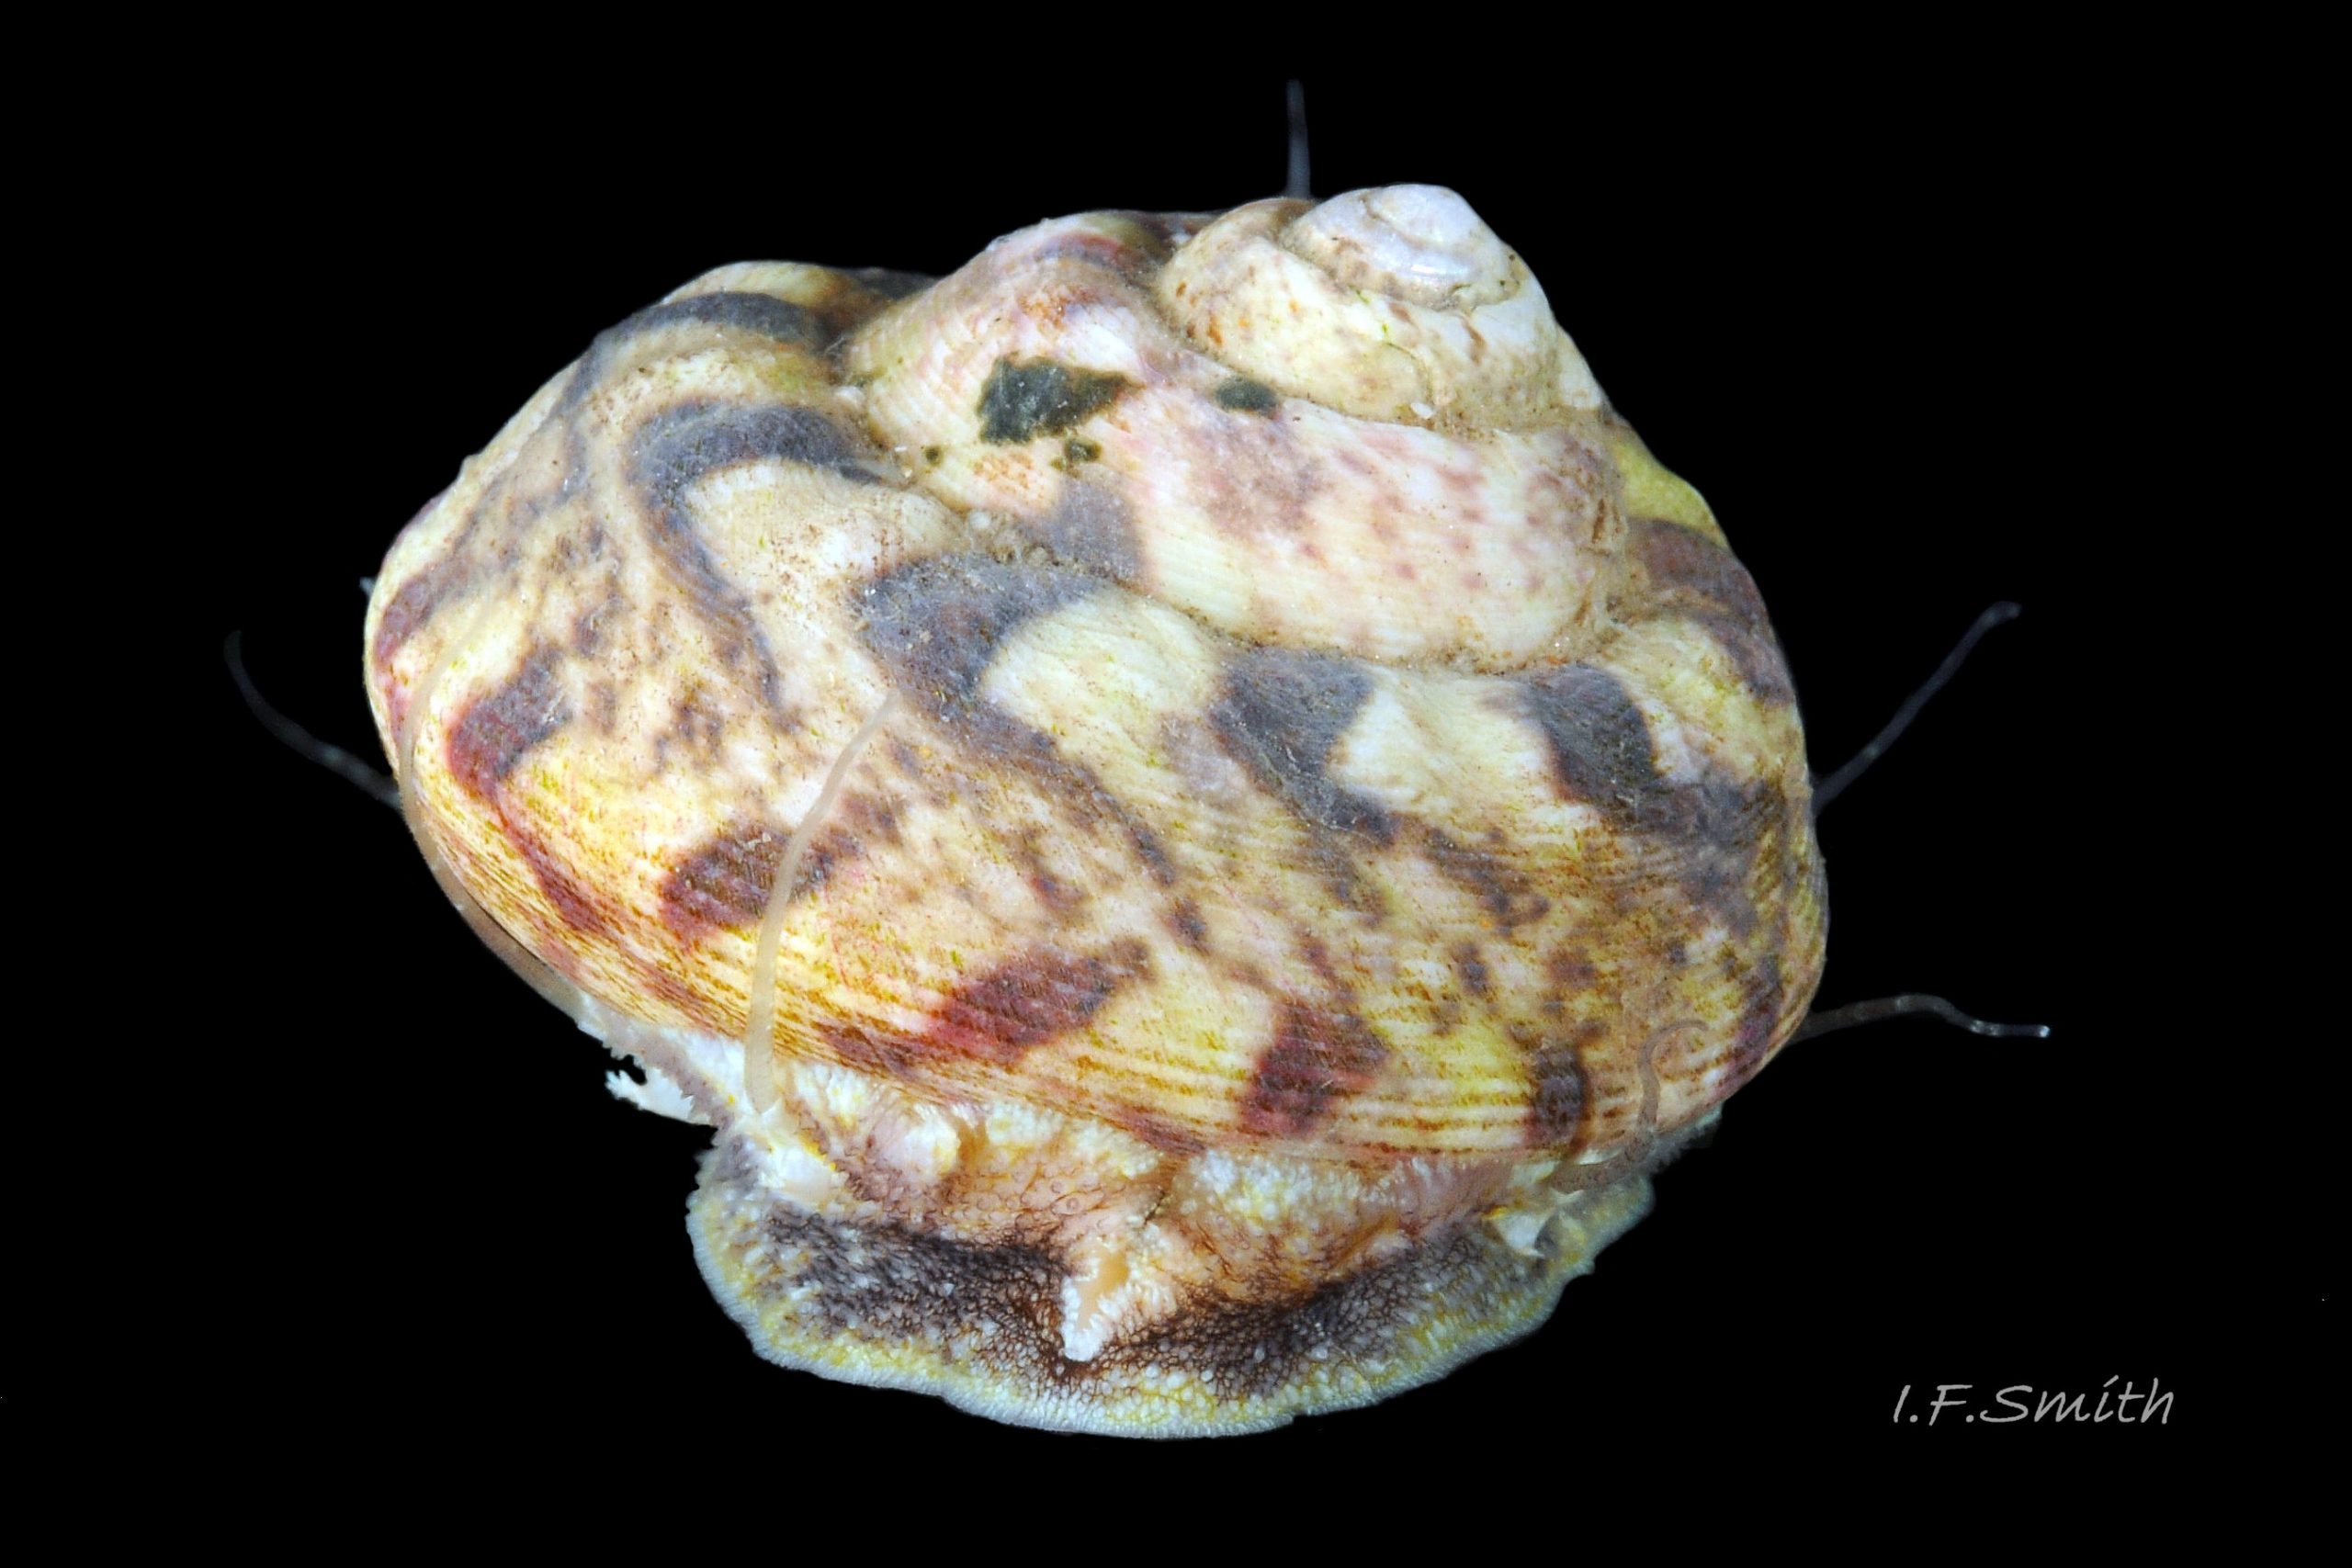 25 Gibbula magus. Height 19mm, breadth 25mm. Cardigan Bay, Wales. 2015.